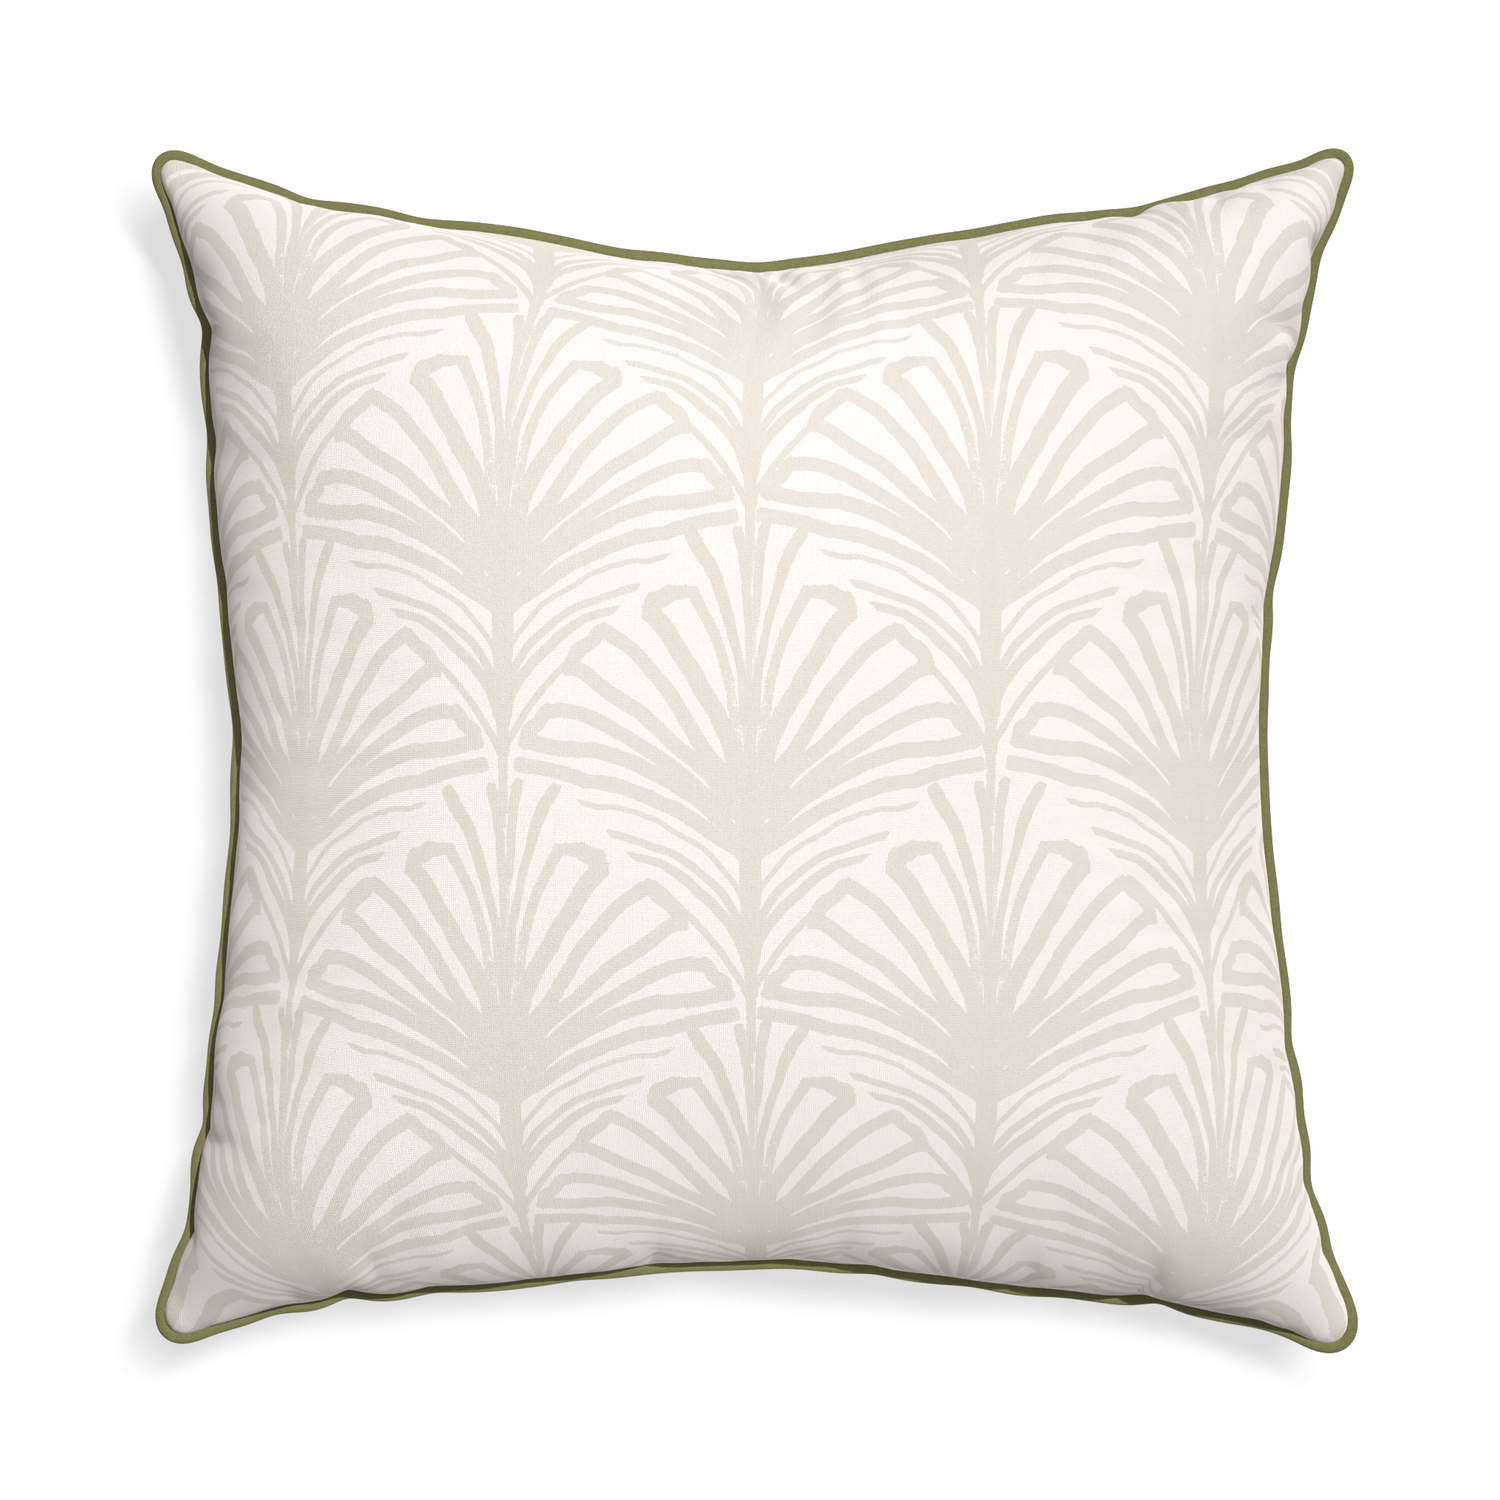 Euro-sham suzy sand custom beige palmpillow with moss piping on white background